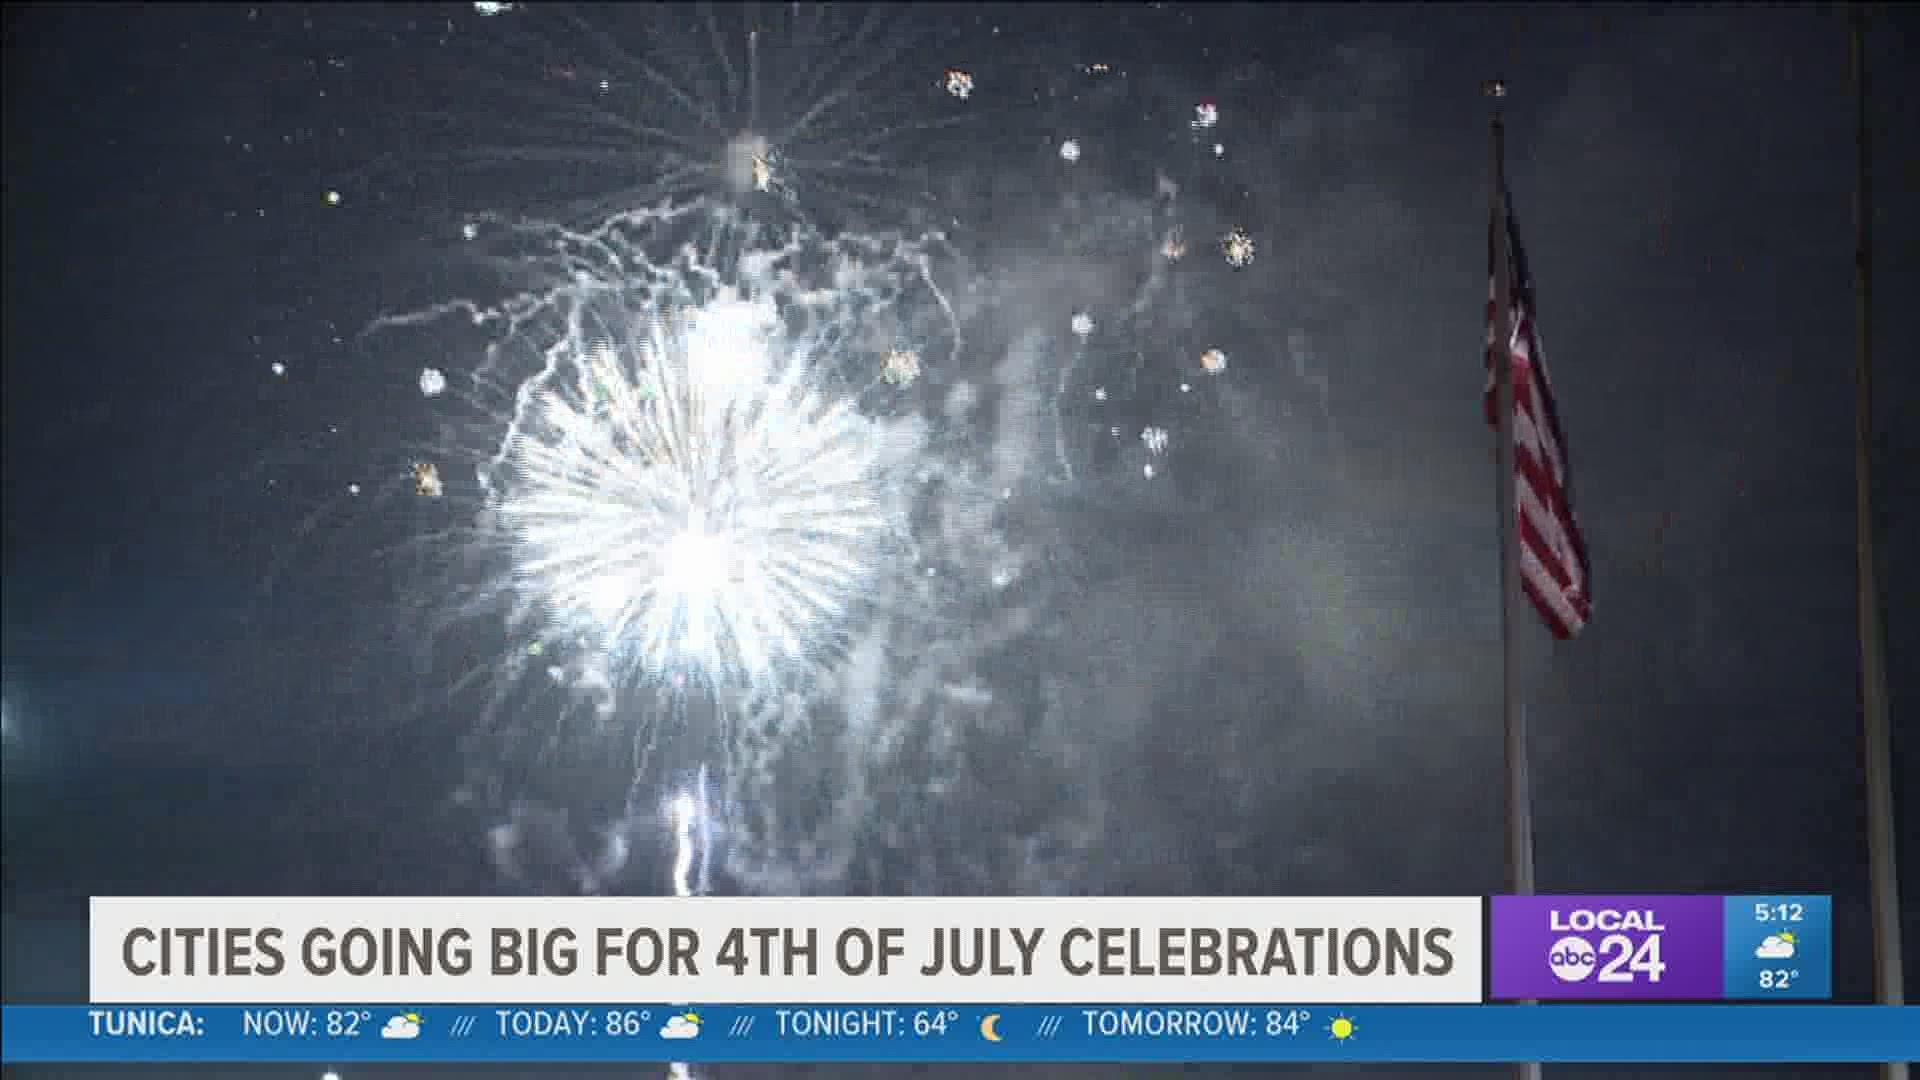 Collierville will host its largest fireworks display this 4th of July weekend.